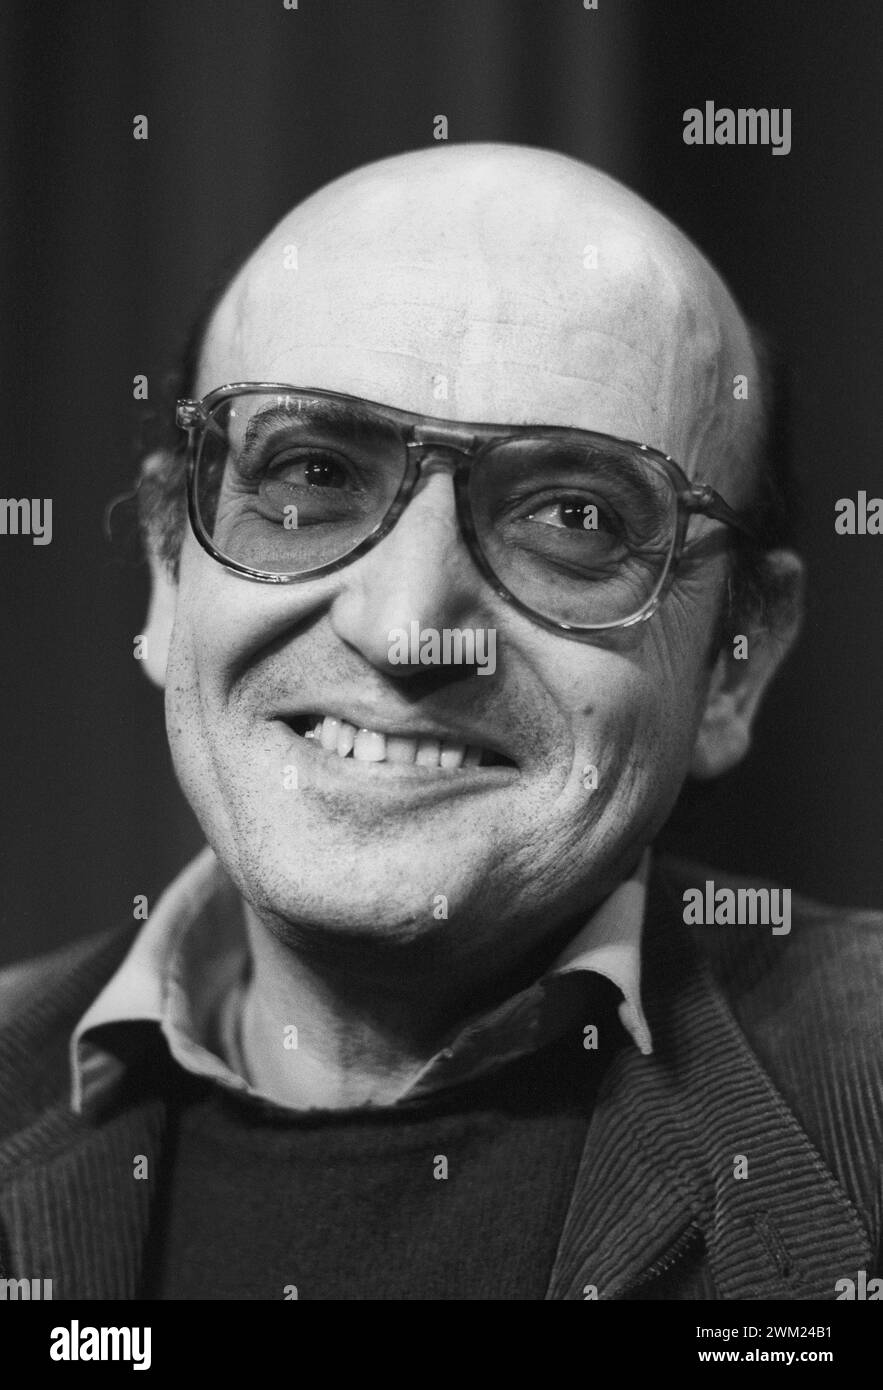 MME4775316 Cannes Film Festival 1983. Greek movie director Theo Angelopoulos/Festival del Cinema di Cannes 1983. He registered Theo Angelopoulos -; (add.info.: Cannes Film Festival 1983. Greek movie director Theo Angelopoulos/Festival del Cinema di Cannes 1983. He registered Theo Angelopoulos -); © Marcello Mencarini. All rights reserved 2024. Stock Photo